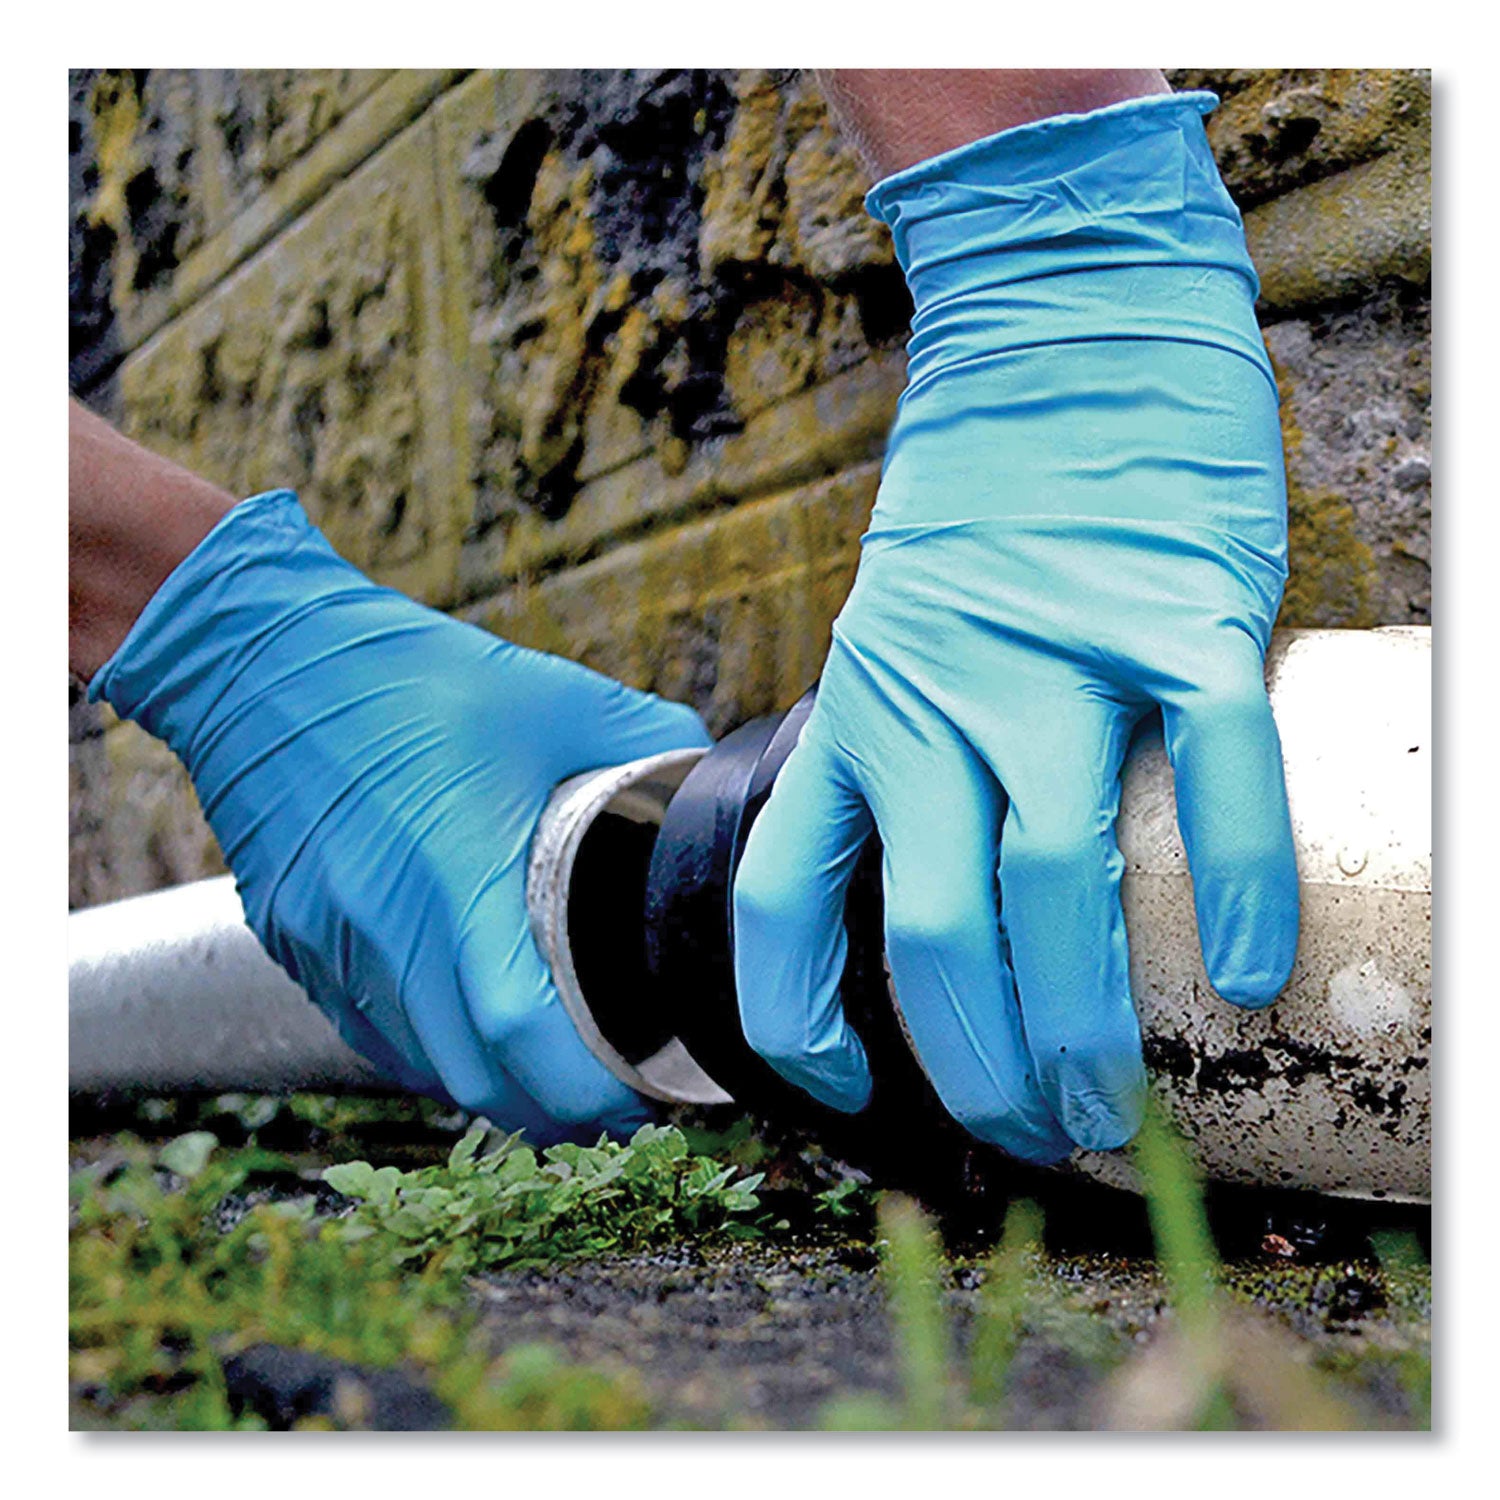 industrial-nitrile-gloves-powder-free-5-mil-blue-x-large-100-gloves-box-10-boxes-carton_axcinpf48100 - 5